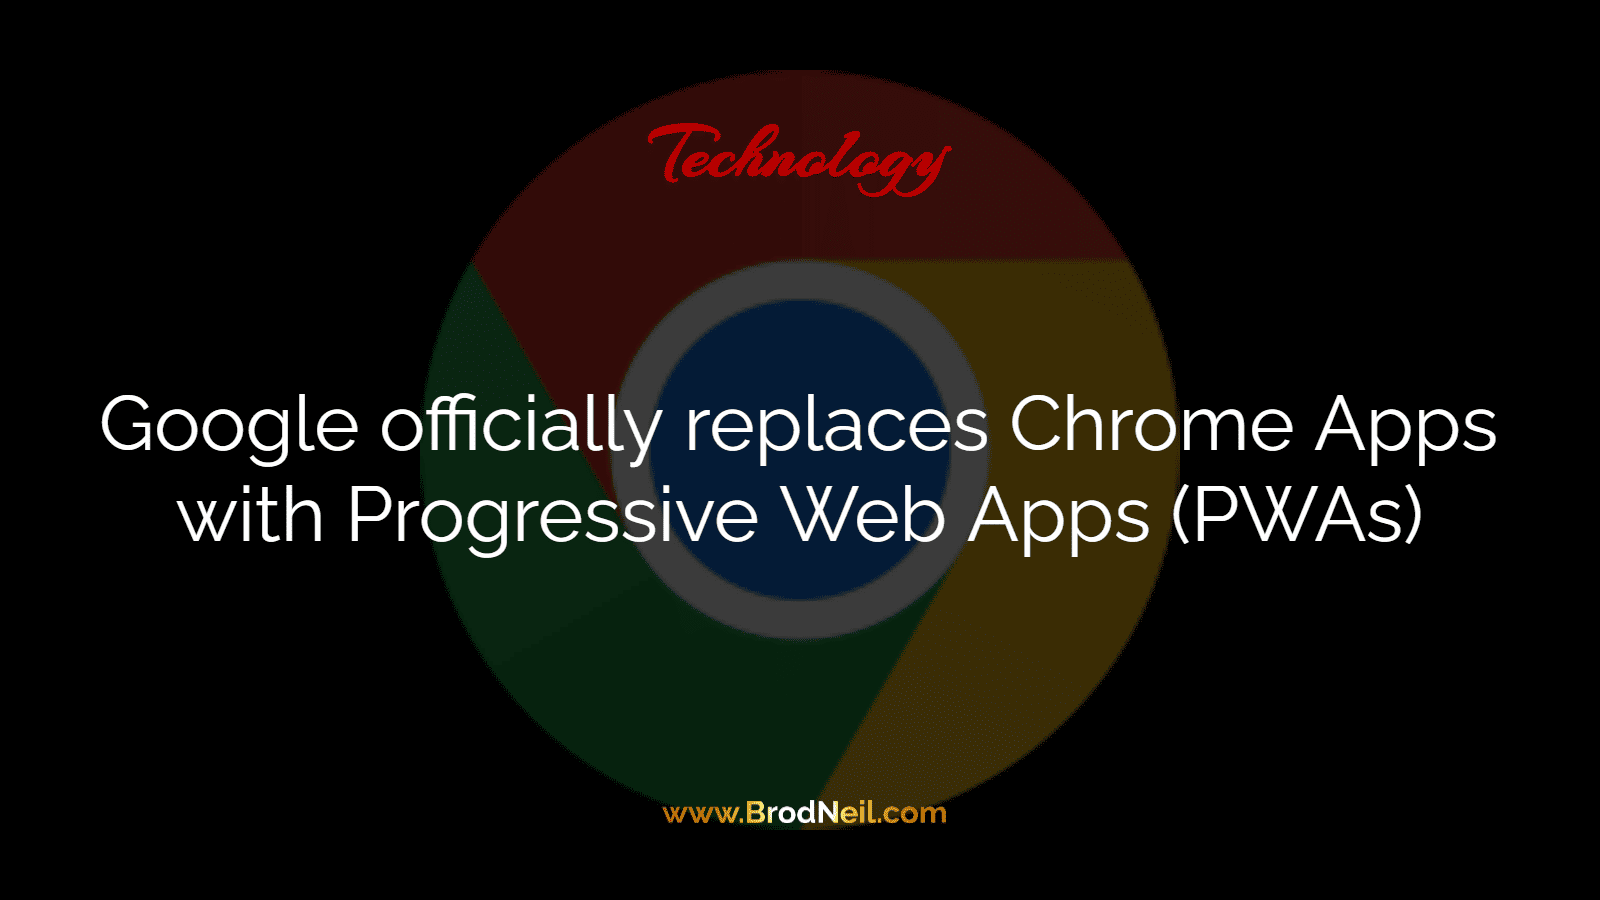 Chrome - Google officially replaces Chrome Apps with Progressive Web Apps (PWAs)